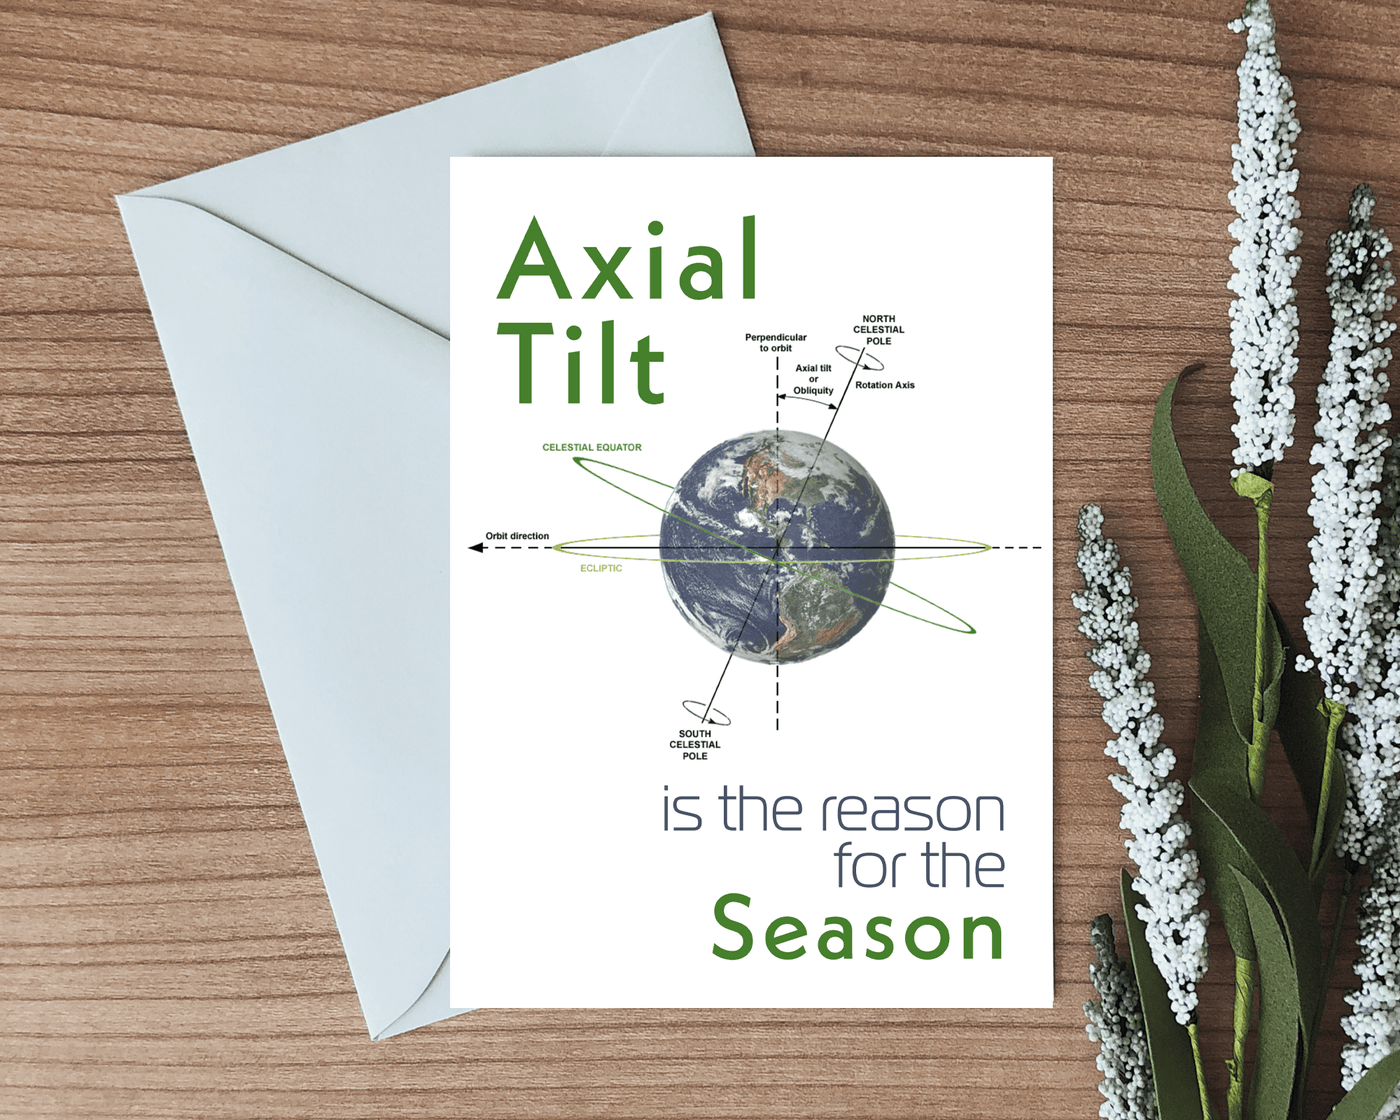 Greeting card, blank inside, with a joke about axial tilt being the reason for the season. Has picture of earth on its axis